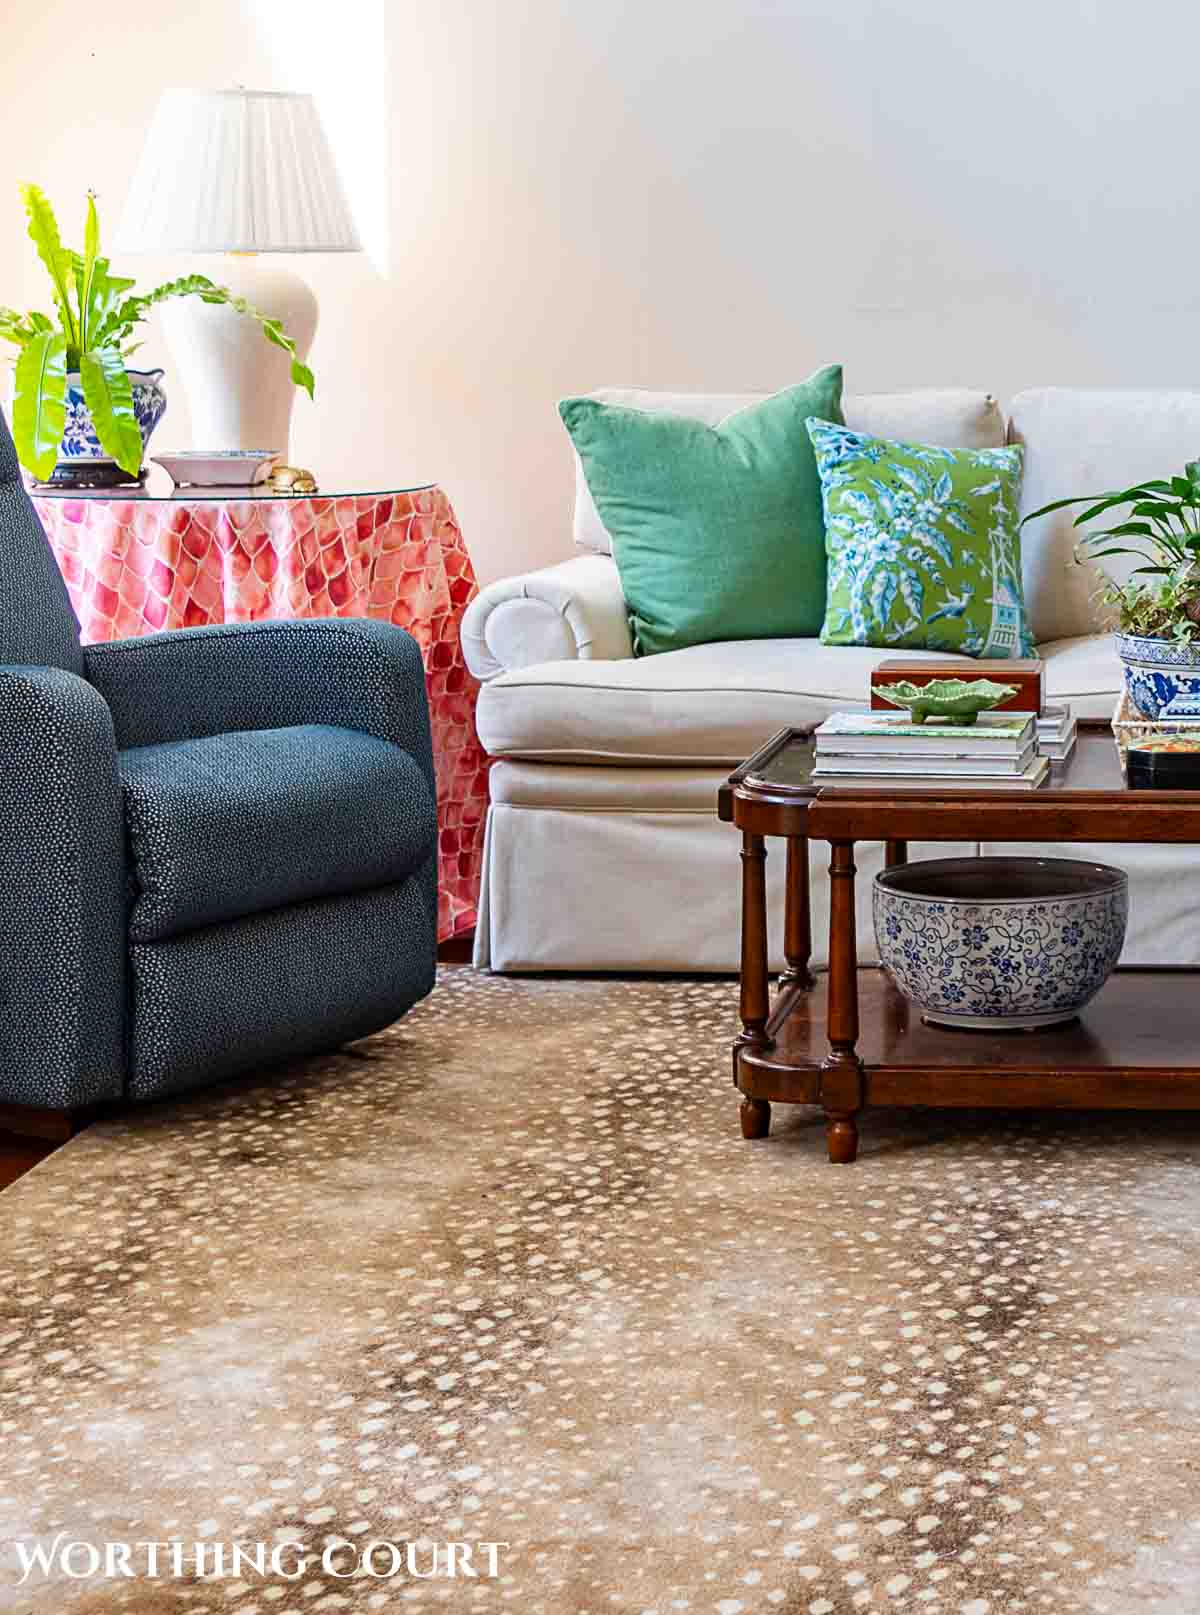 Matching Rugs with Your Hardwood Floors